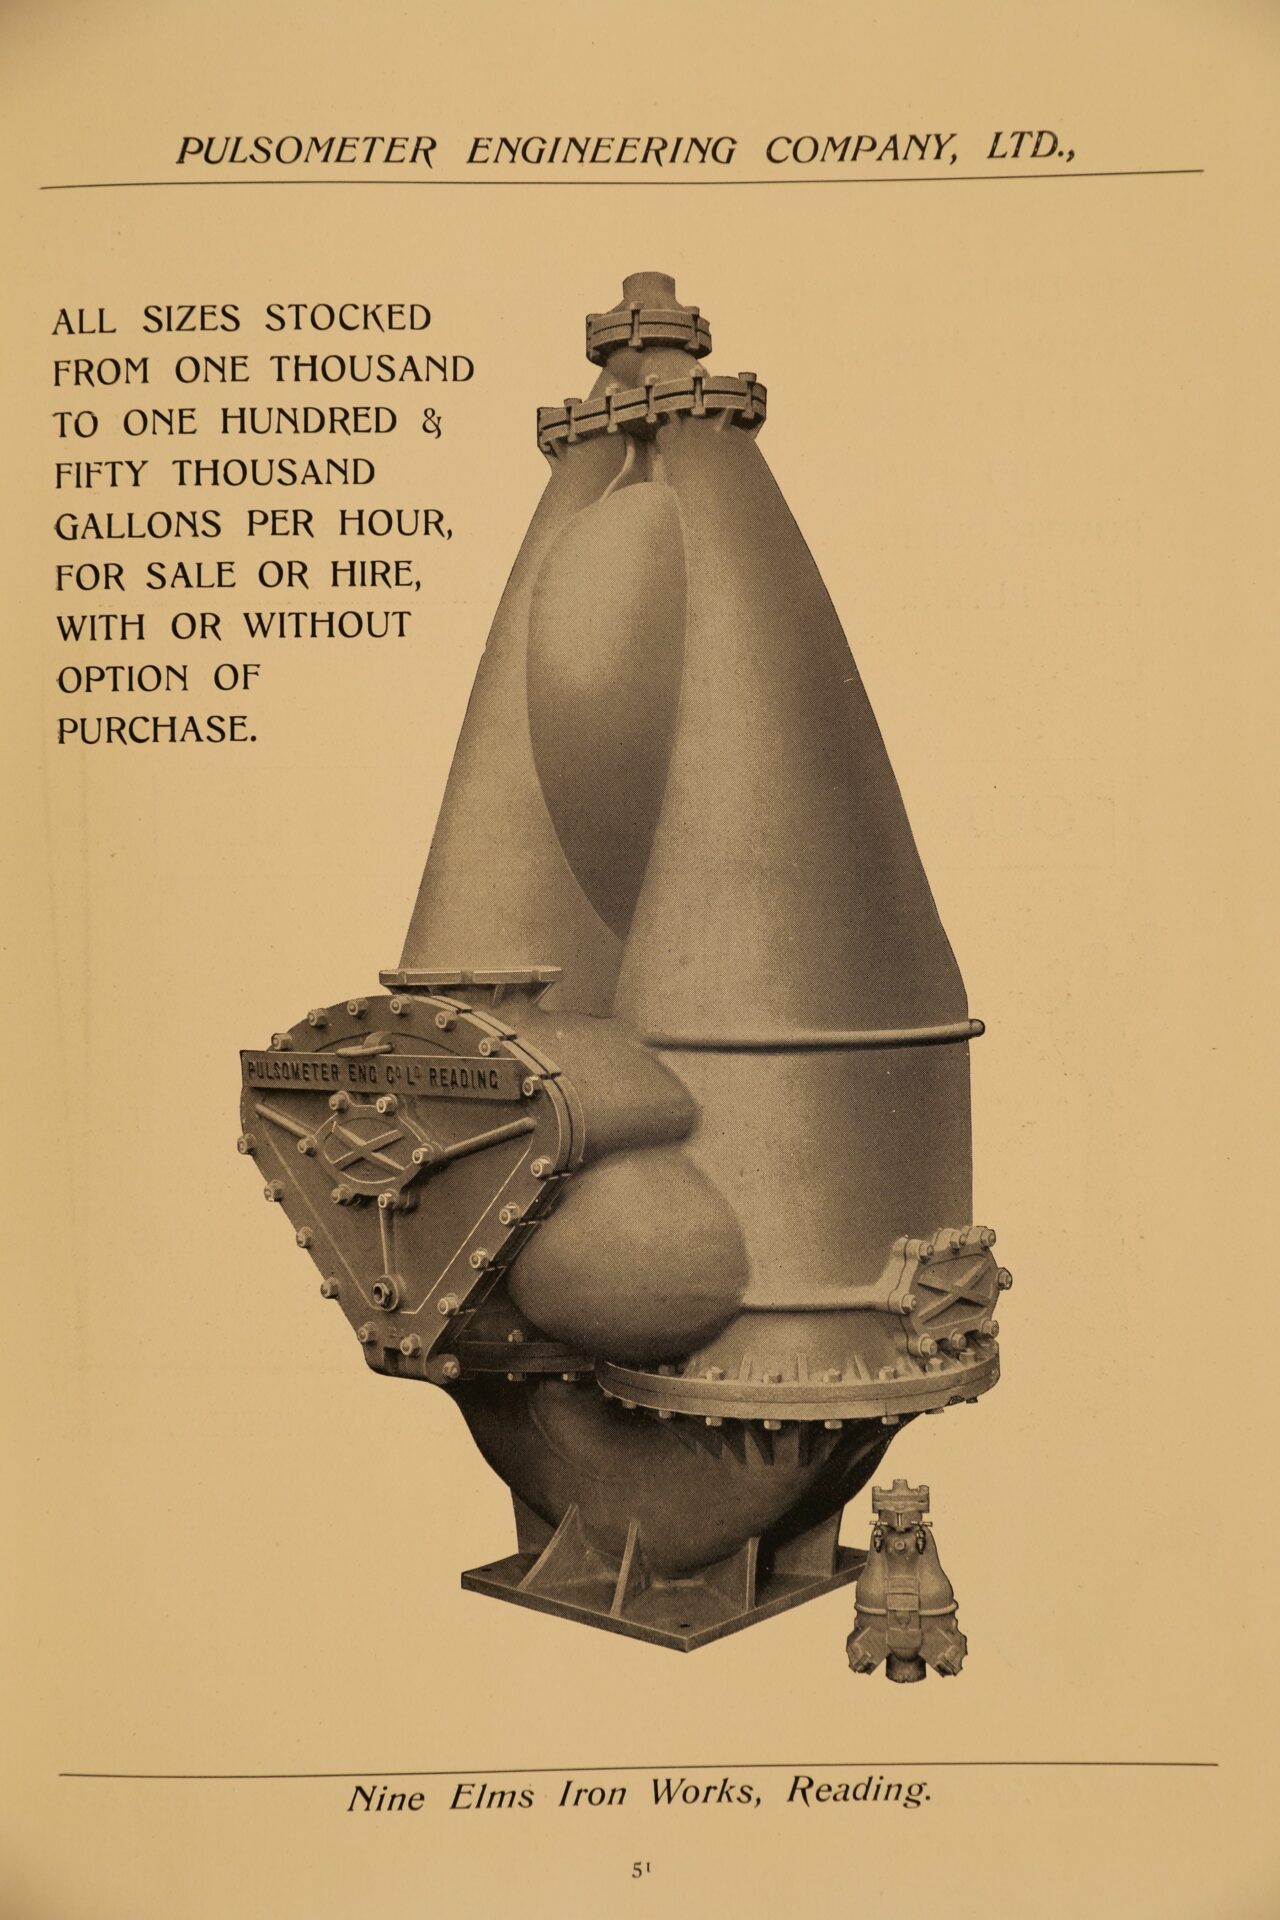 Image of page 51 from Pulsometer Steam Pumps Catalogue 1908